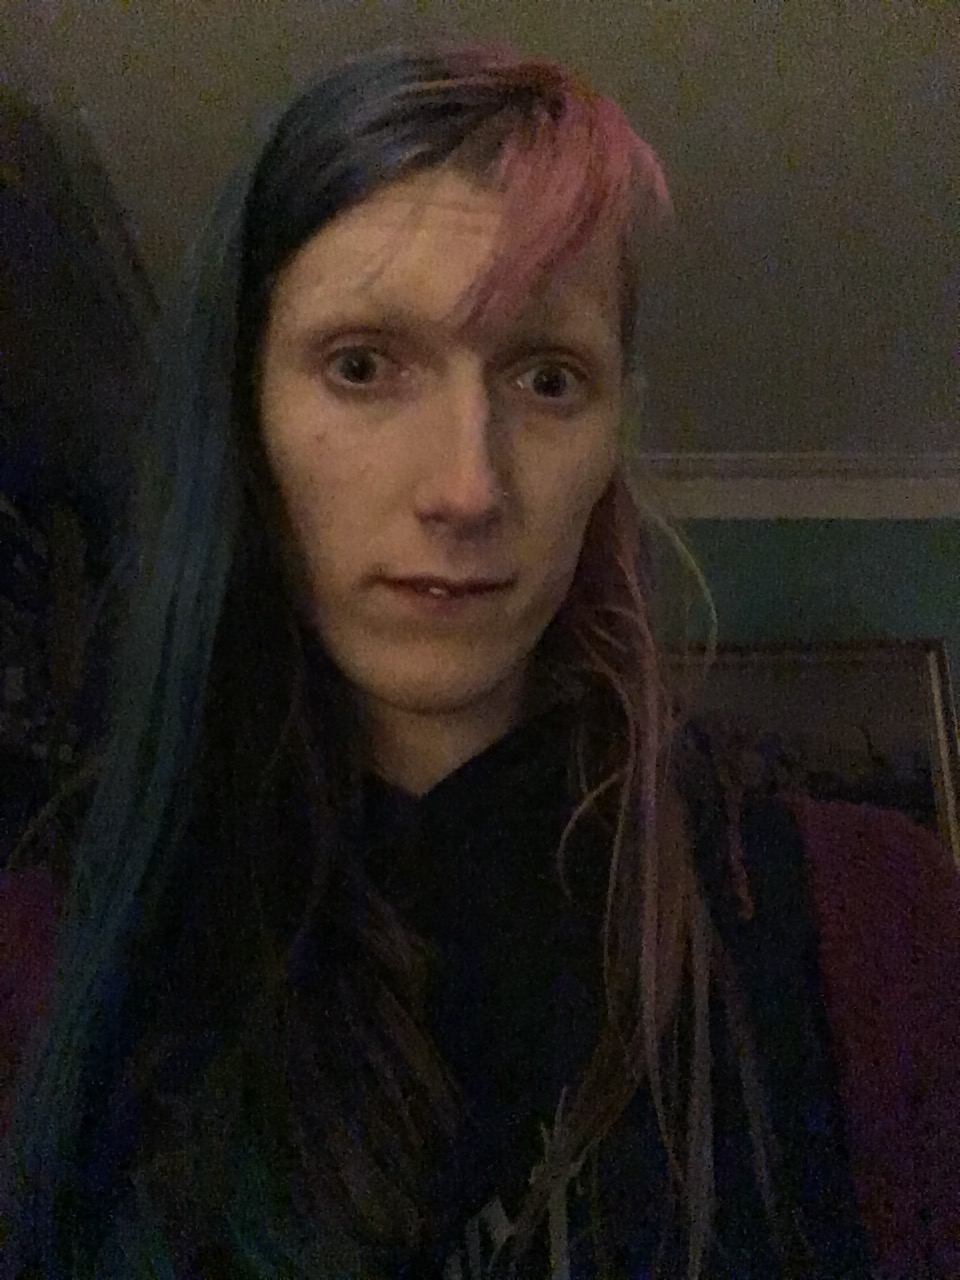 An image of a slightly wistful looking goth lady in low lighting